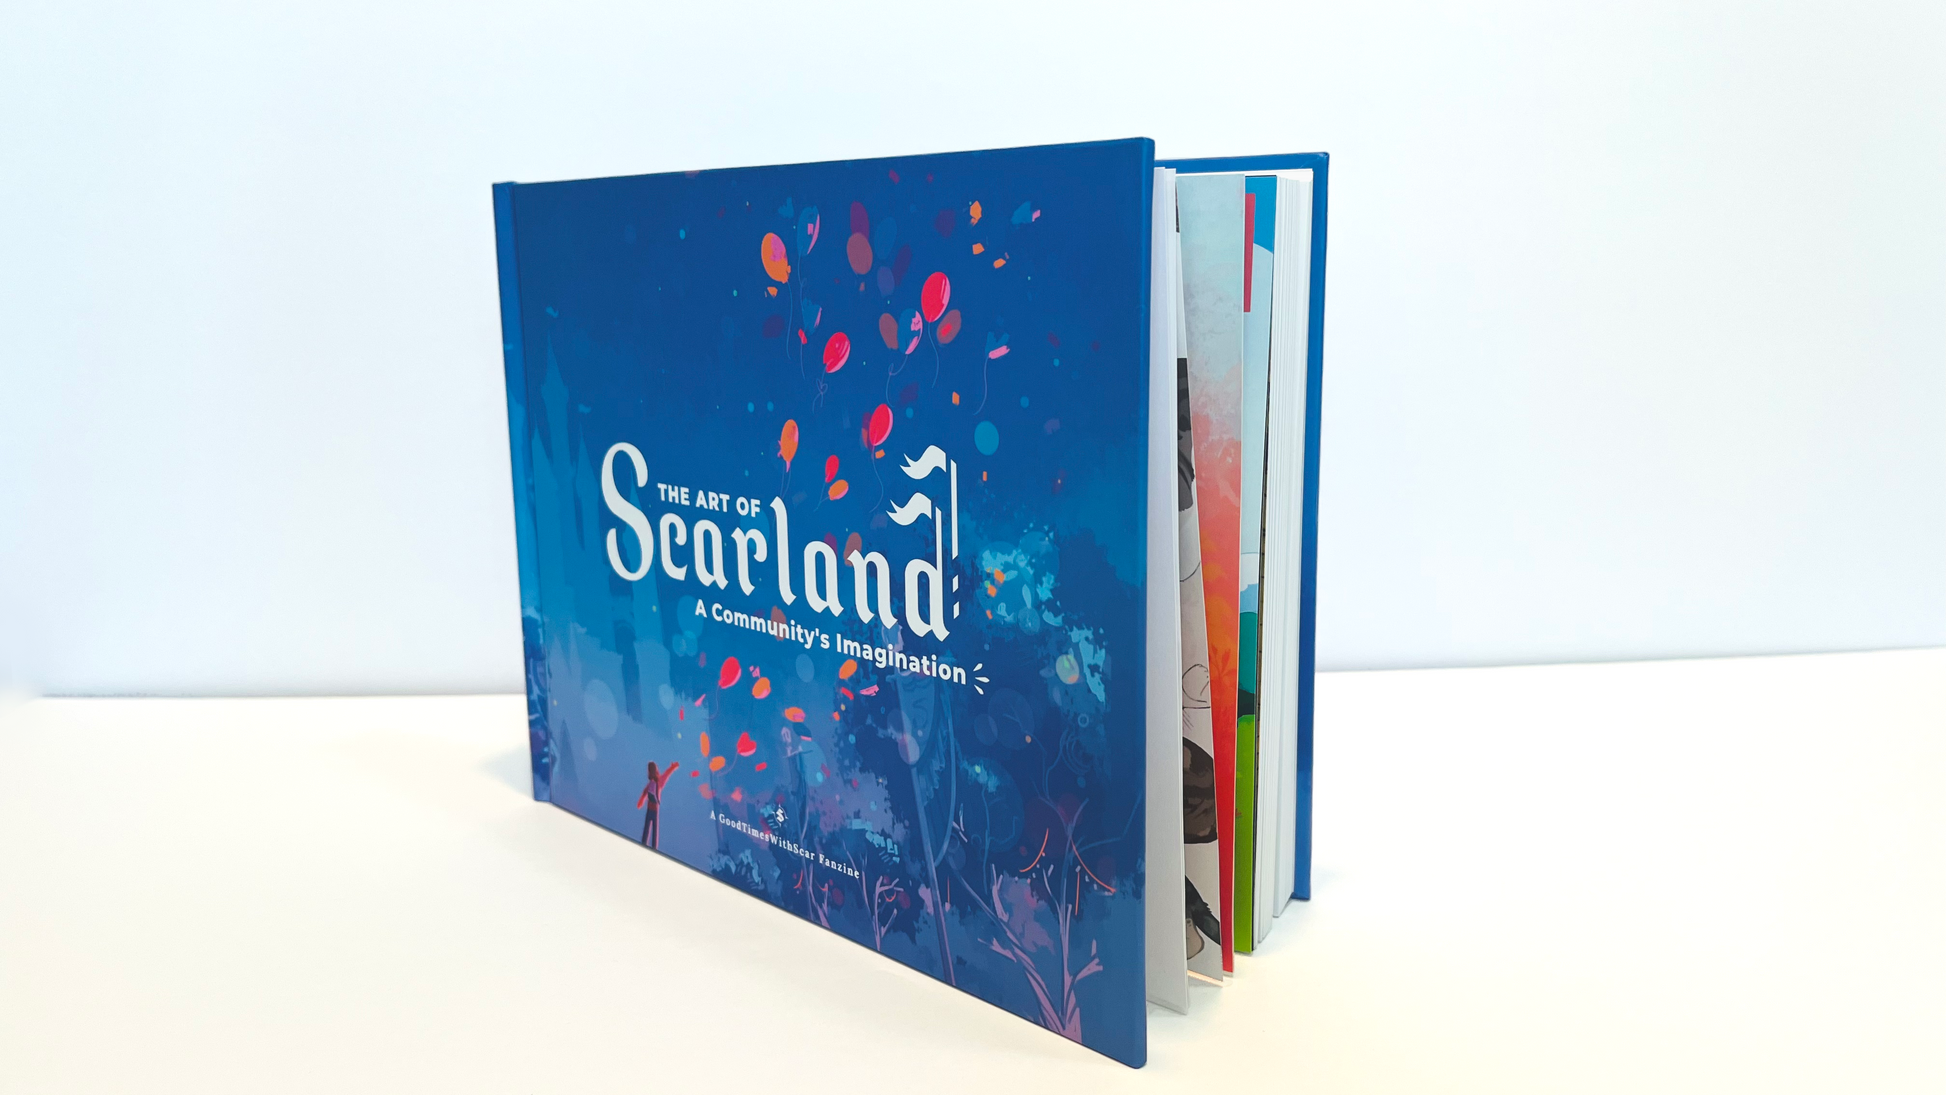 The Scarland Artbook on a white surface with a white background. It is stood such that the front and the open side of the book can be seen. The edges of the pages are barely visible since the book is cracked open.